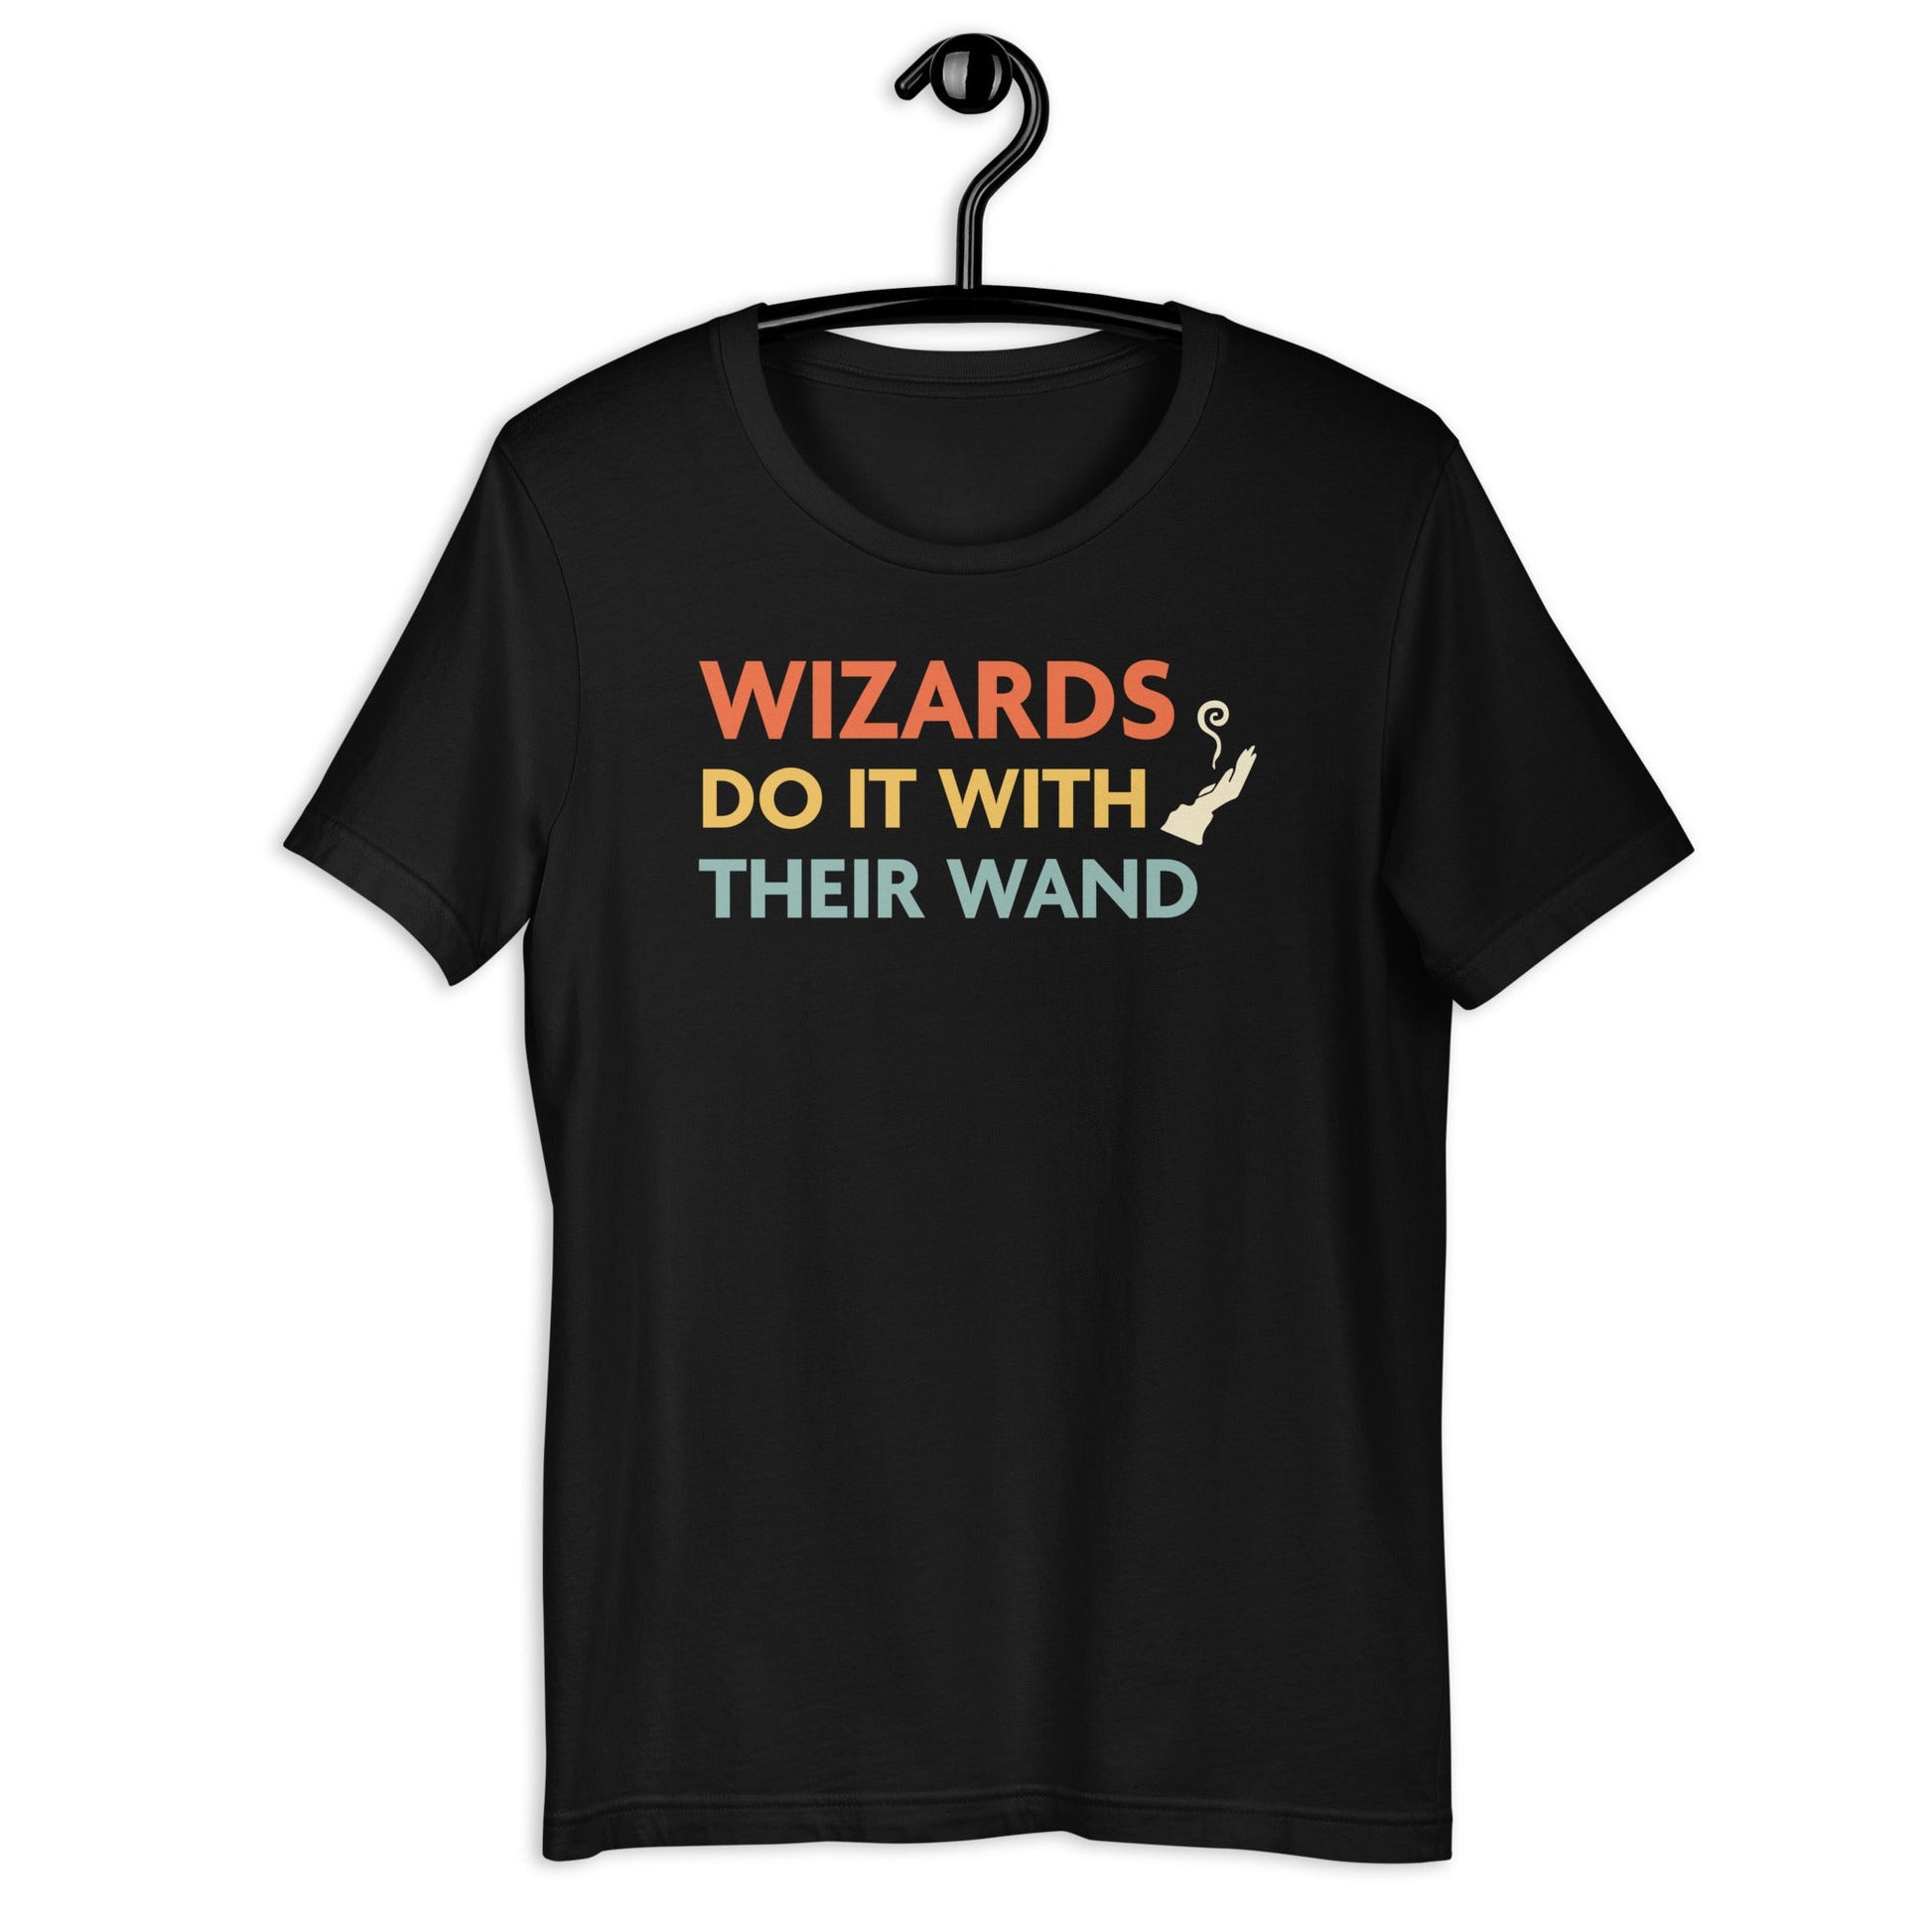 DnD Wizards Do It With Their Wand Shirt T-Shirt Black / S